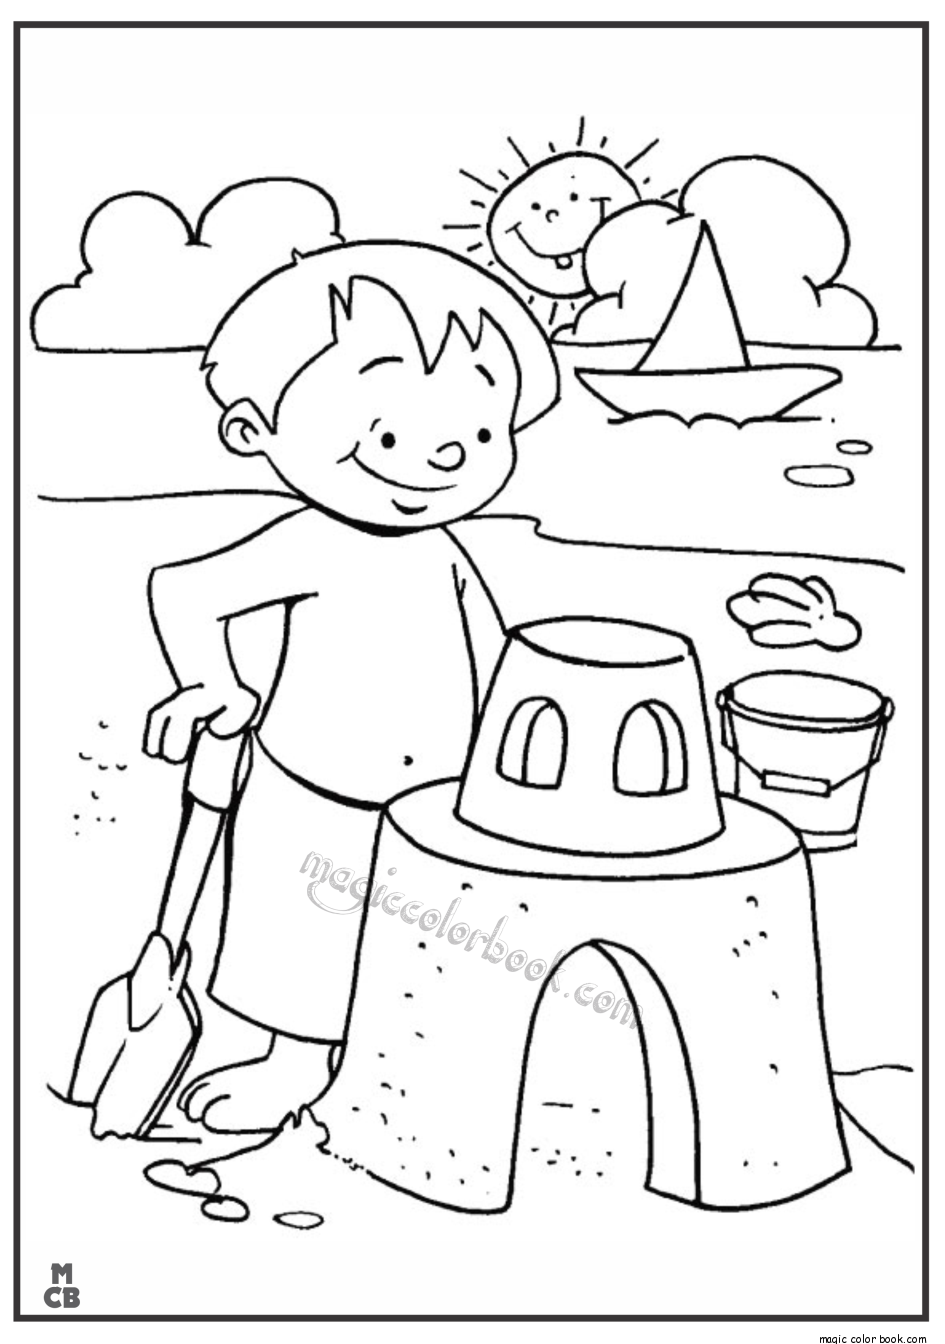 Free Summer Coloring Pages For Kids at GetDrawings | Free download